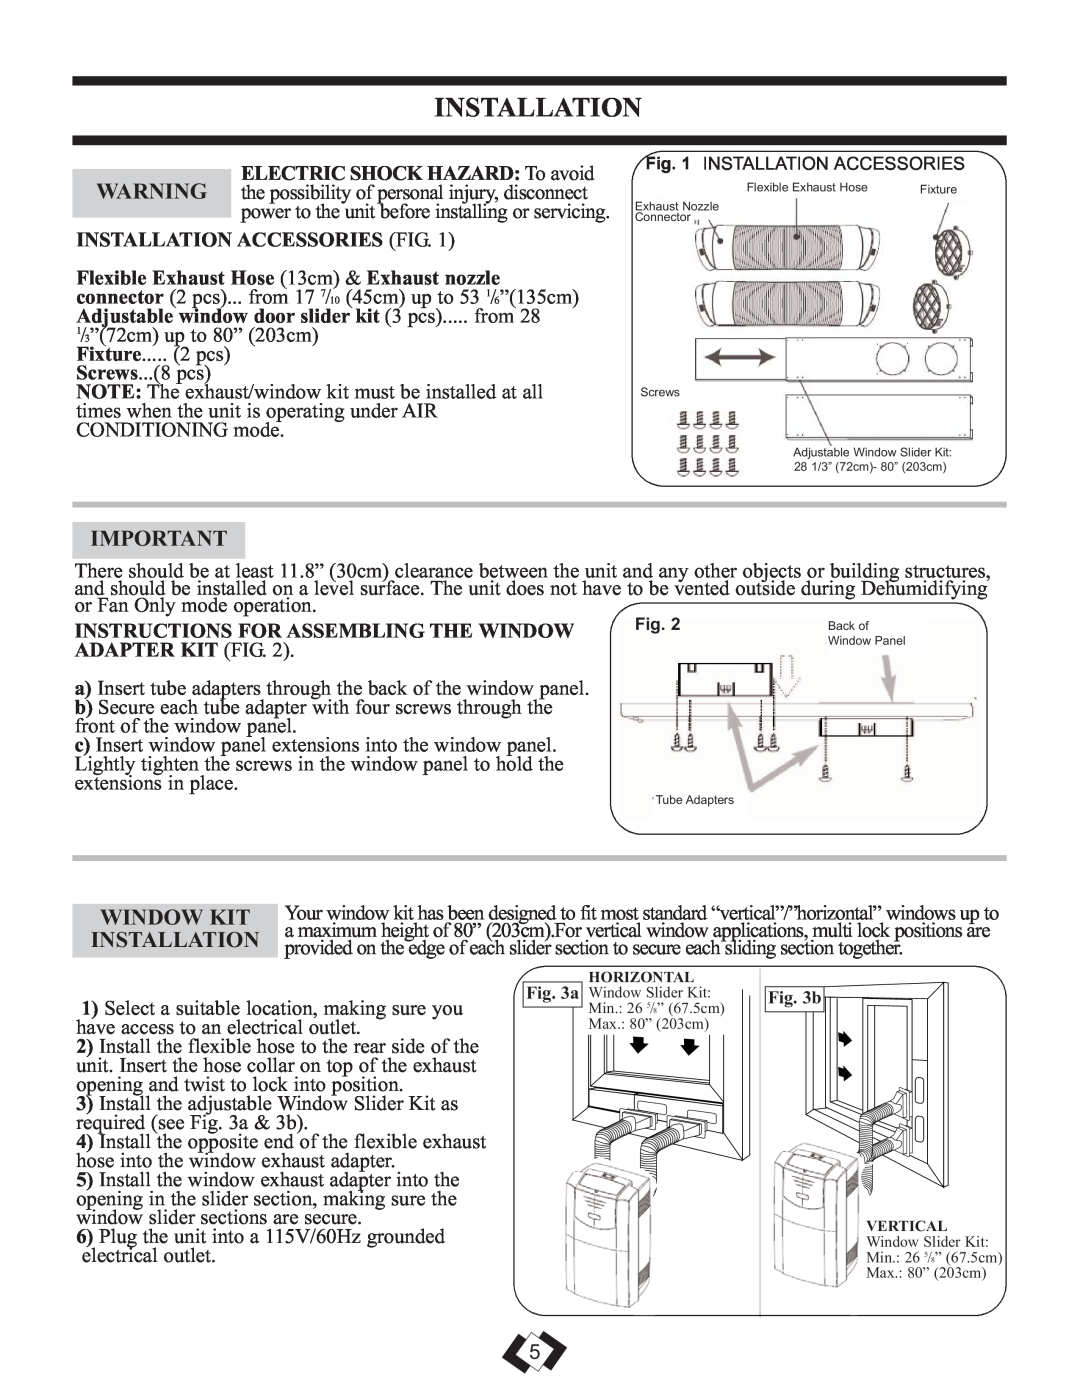 Danby DPAC 12099 Installation Accessories Fig, Fixture, 2 pcs, Instructions For Assembling The Window Adapter Kit Fig 